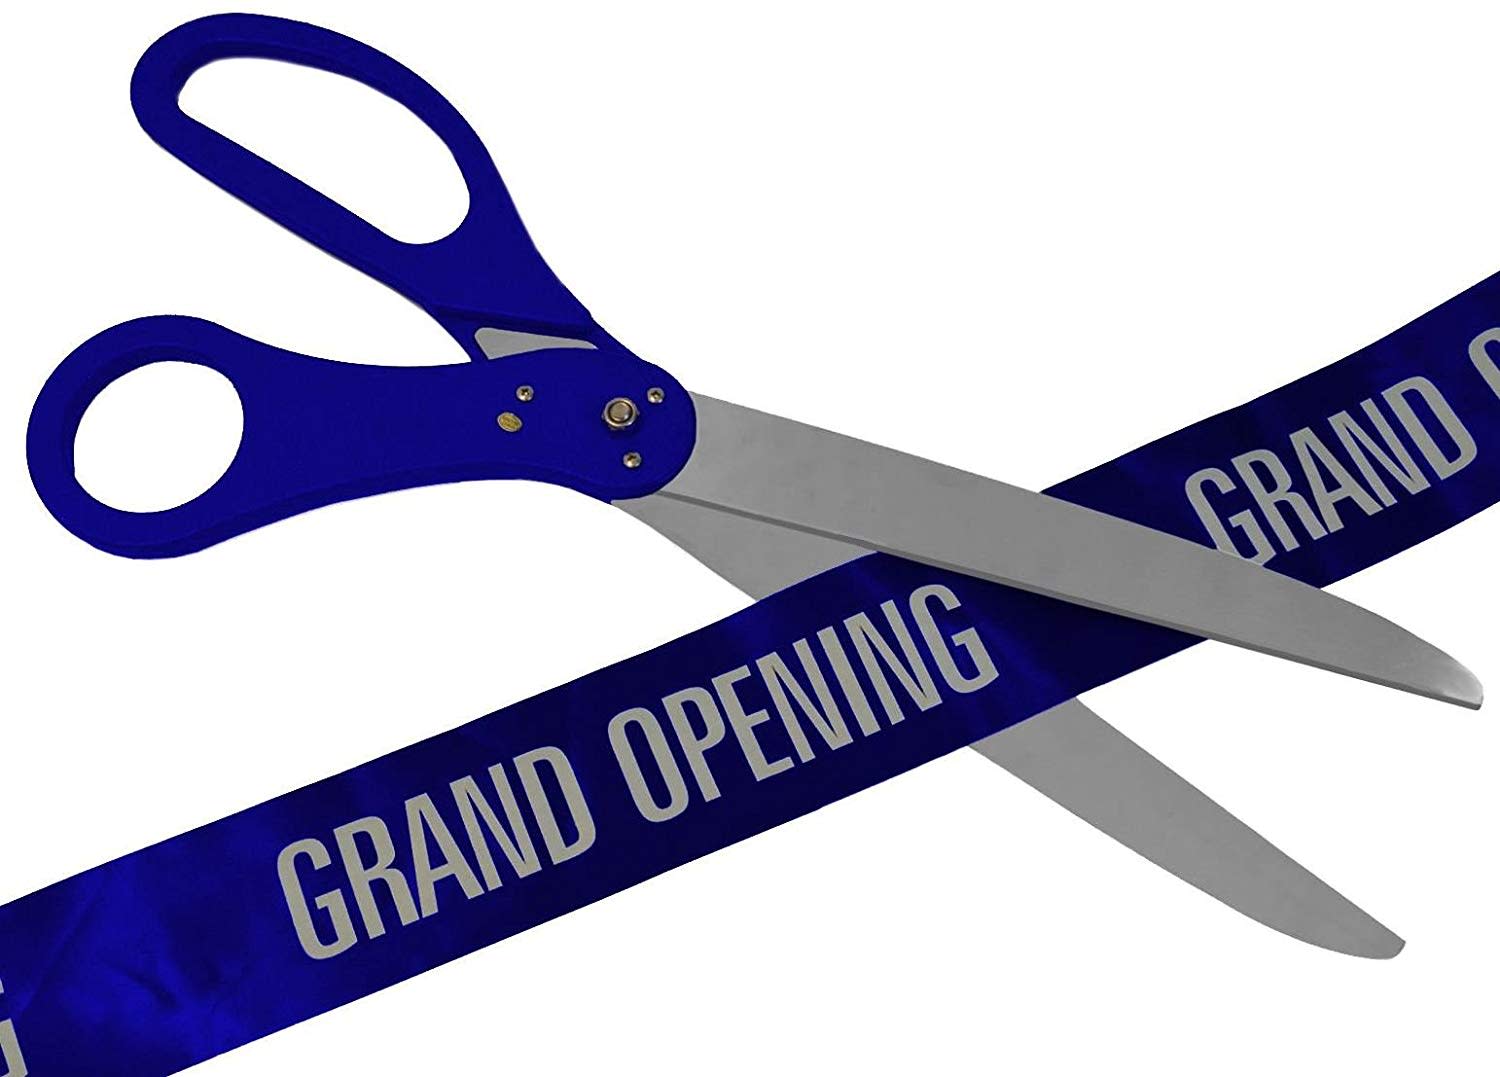 Grand Opening Ceremony Blue. Cutting ribbon Opening Ceremony. Teens Cutting with Scissors. Grand Opening Ceremony Blue Fon. Cutting scissors